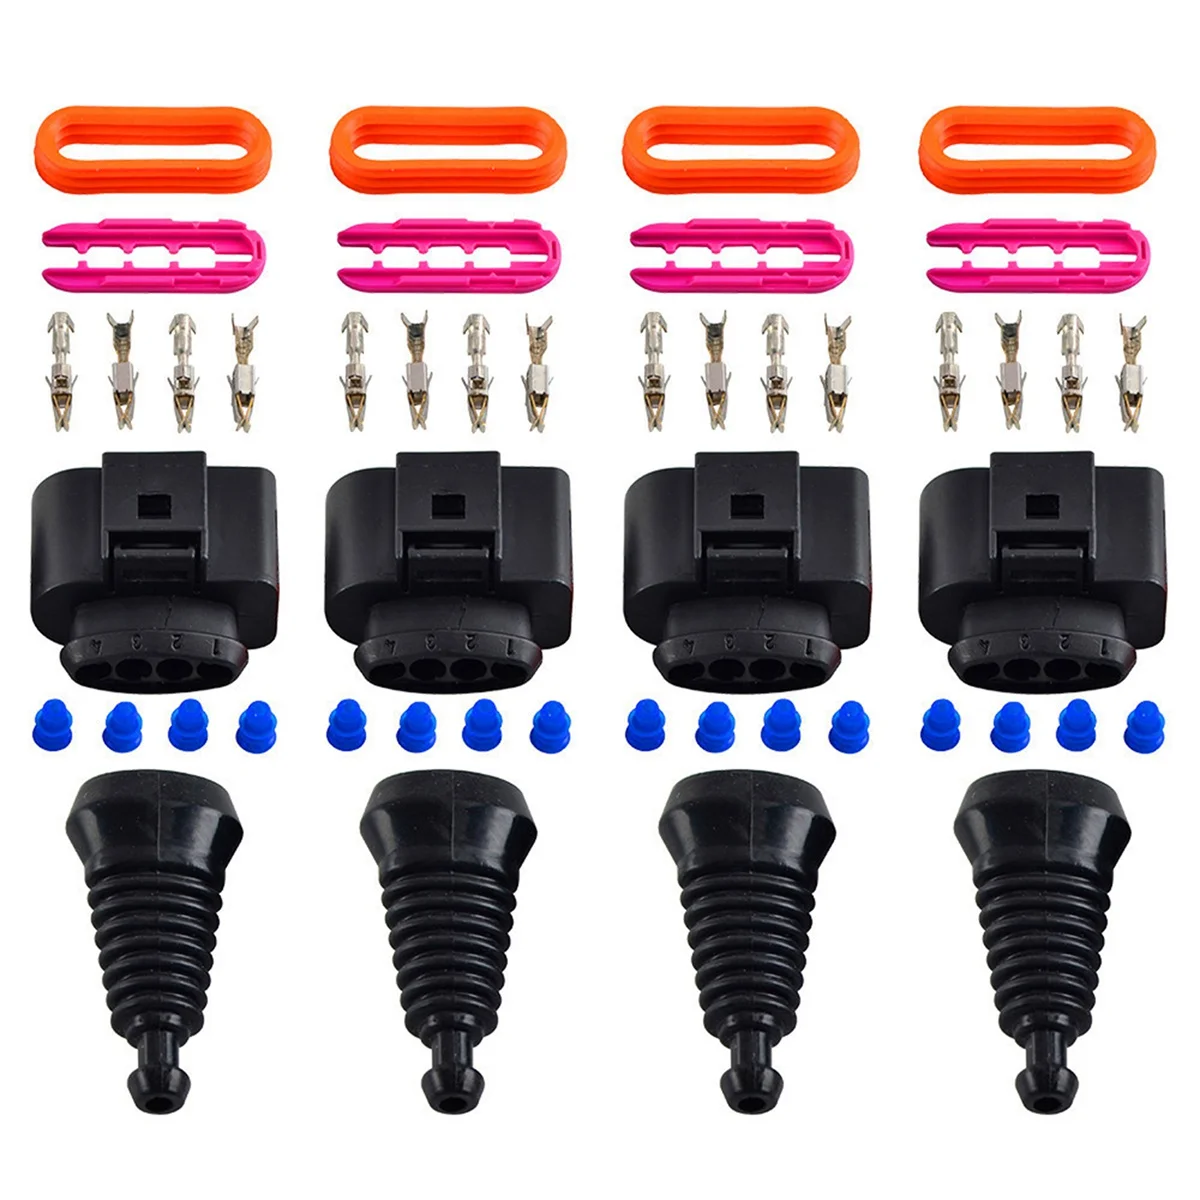 

4 Set Ignition Coil Wiring Harness Connector Plug Repair Kit for Audi A4 A6 A8 Golf Car Coil Plug Replacement 1J0998724